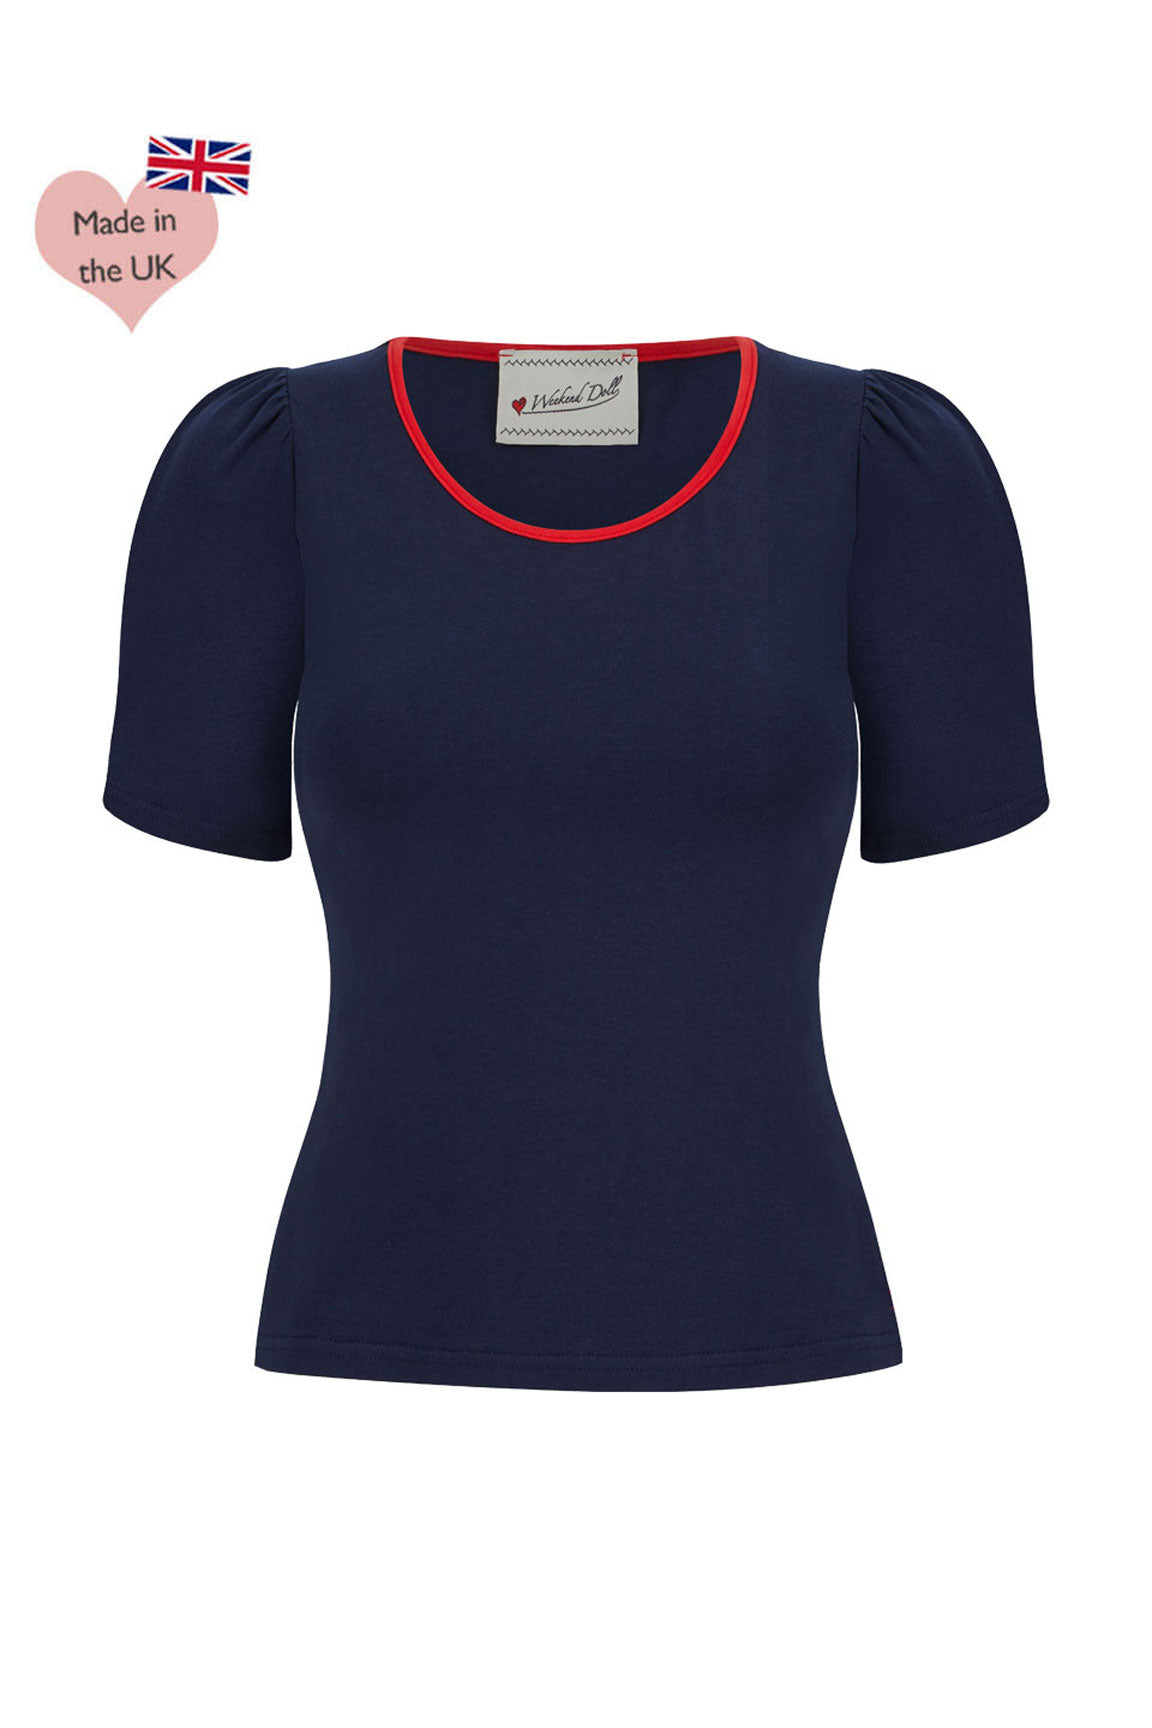 Retro Scoop Neck Navy Jersey Top  | Retro Pin Up Style | Weekend Doll 